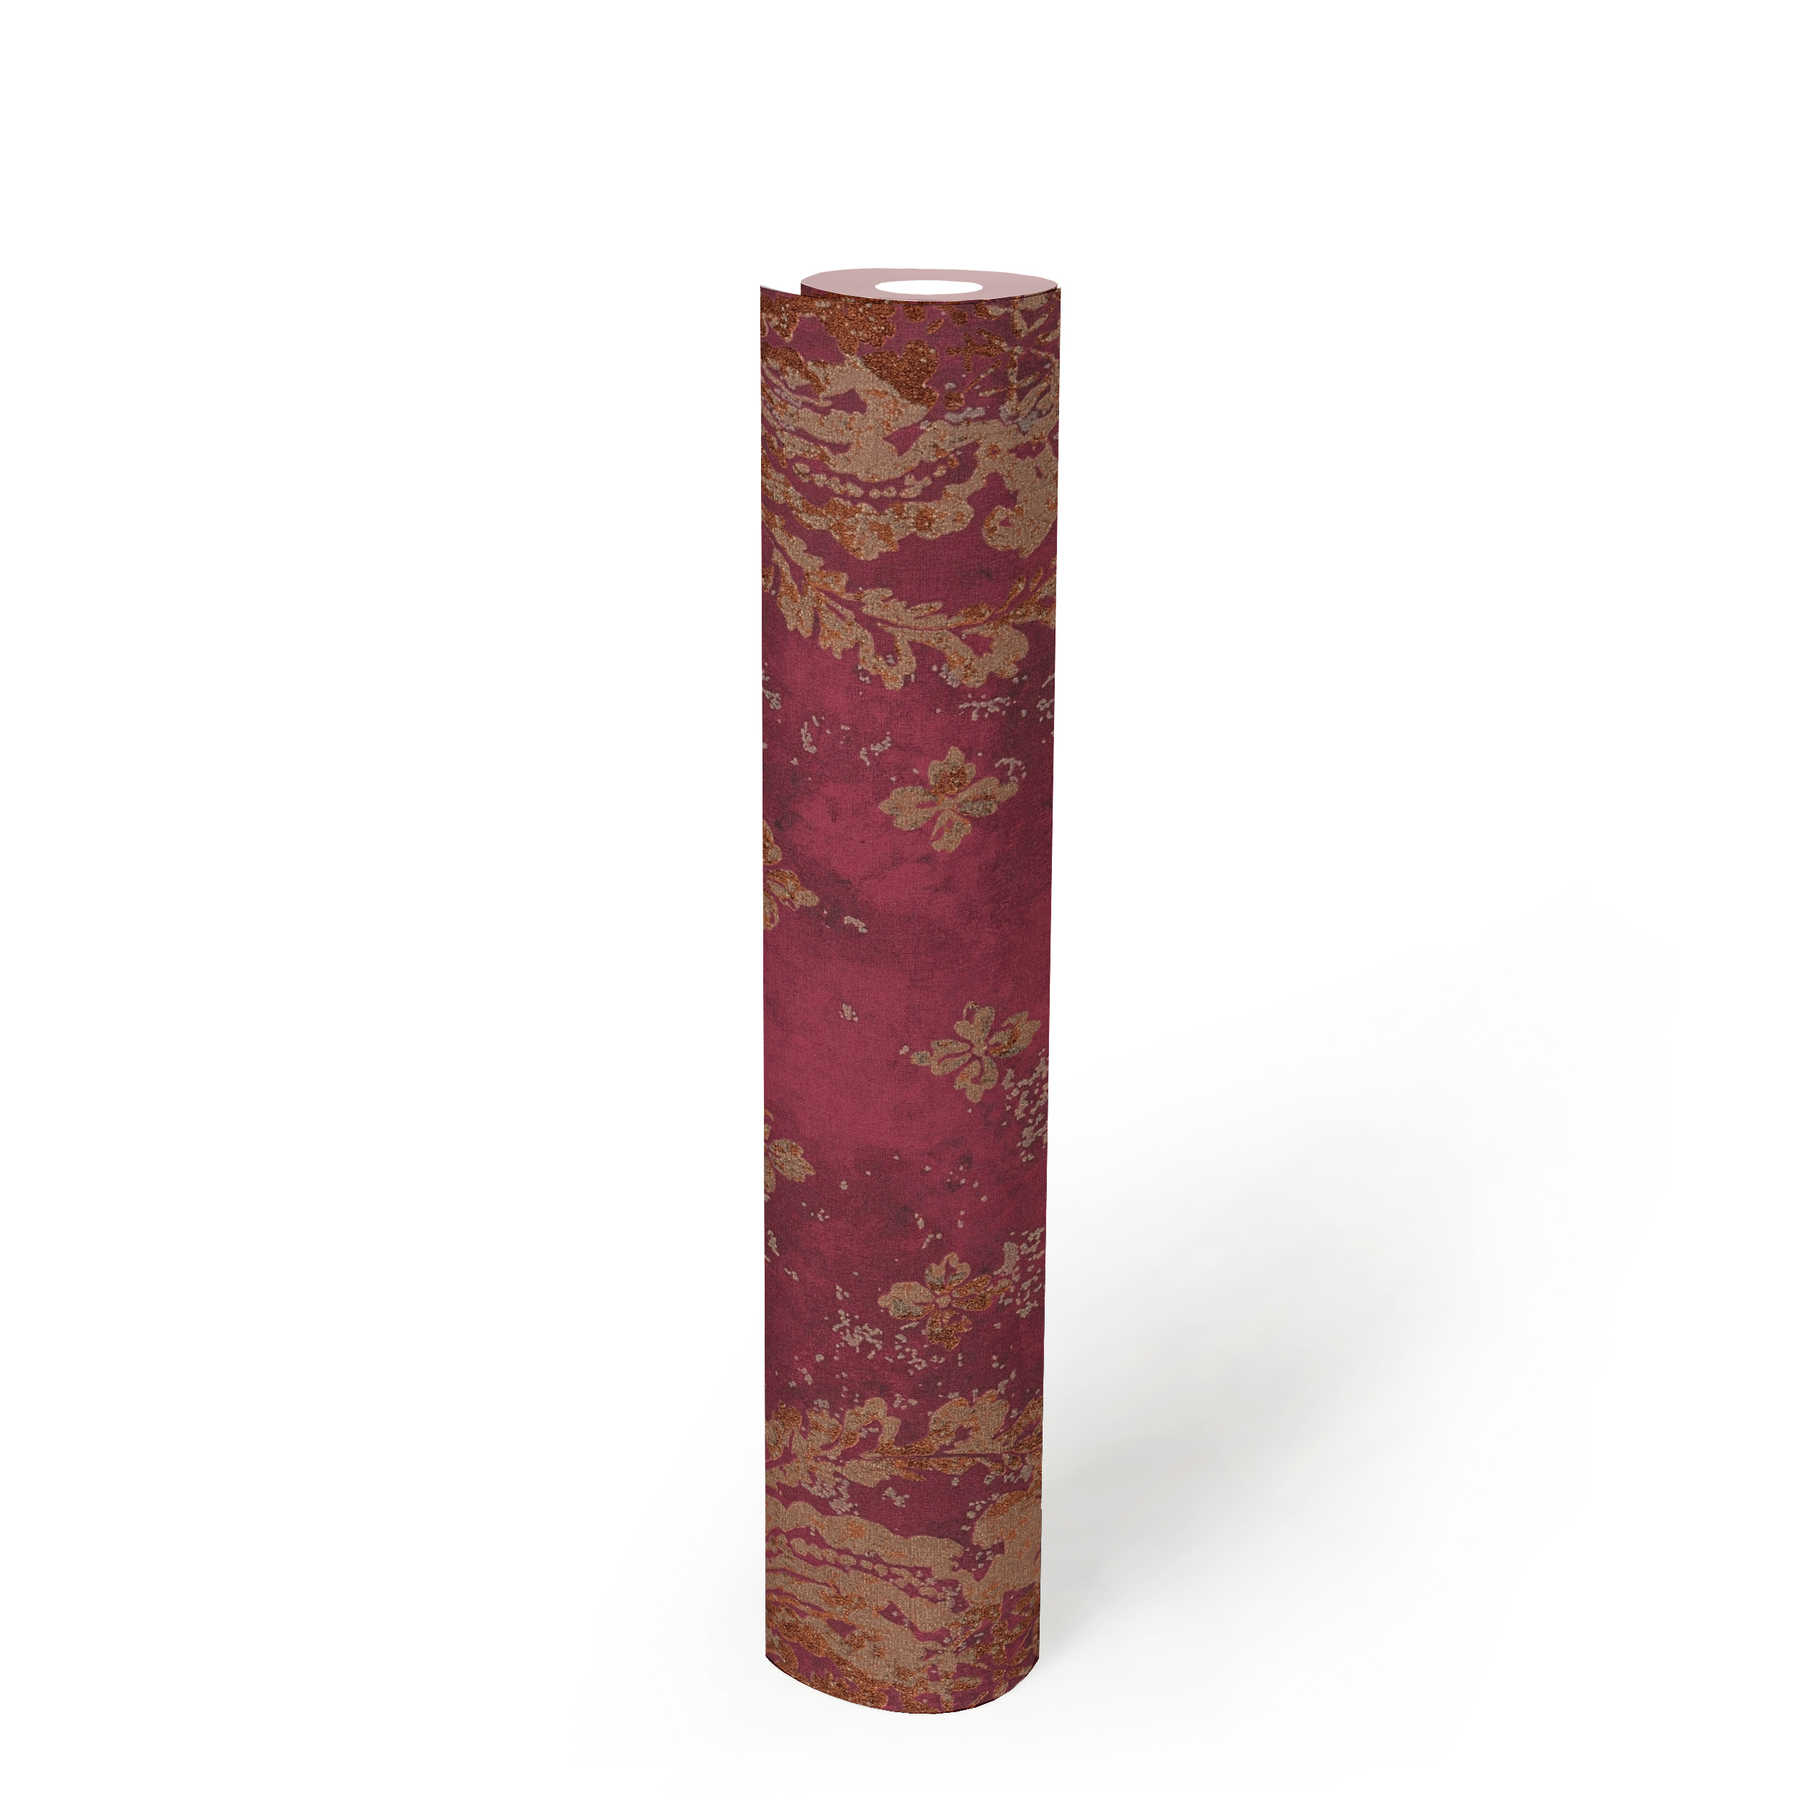             Wine red wallpaper with ornaments in boho style - metallic, red
        